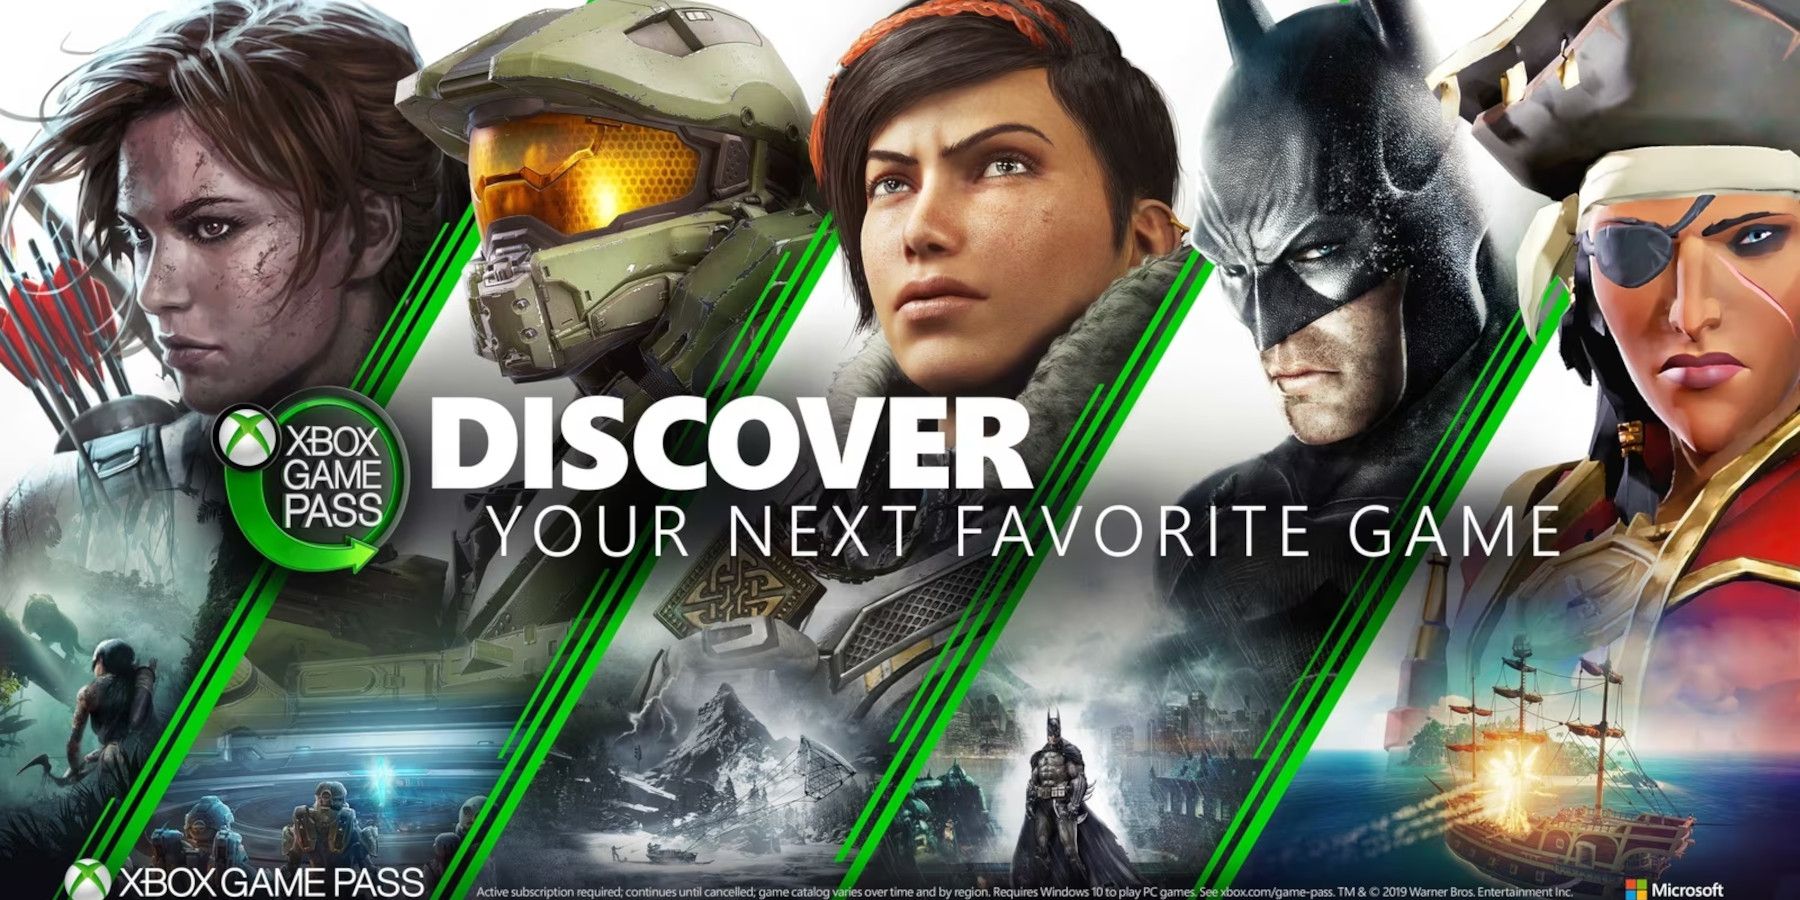 Xbox Boss Explains Why Activision Games On Game Pass Are Delayed Until 2024